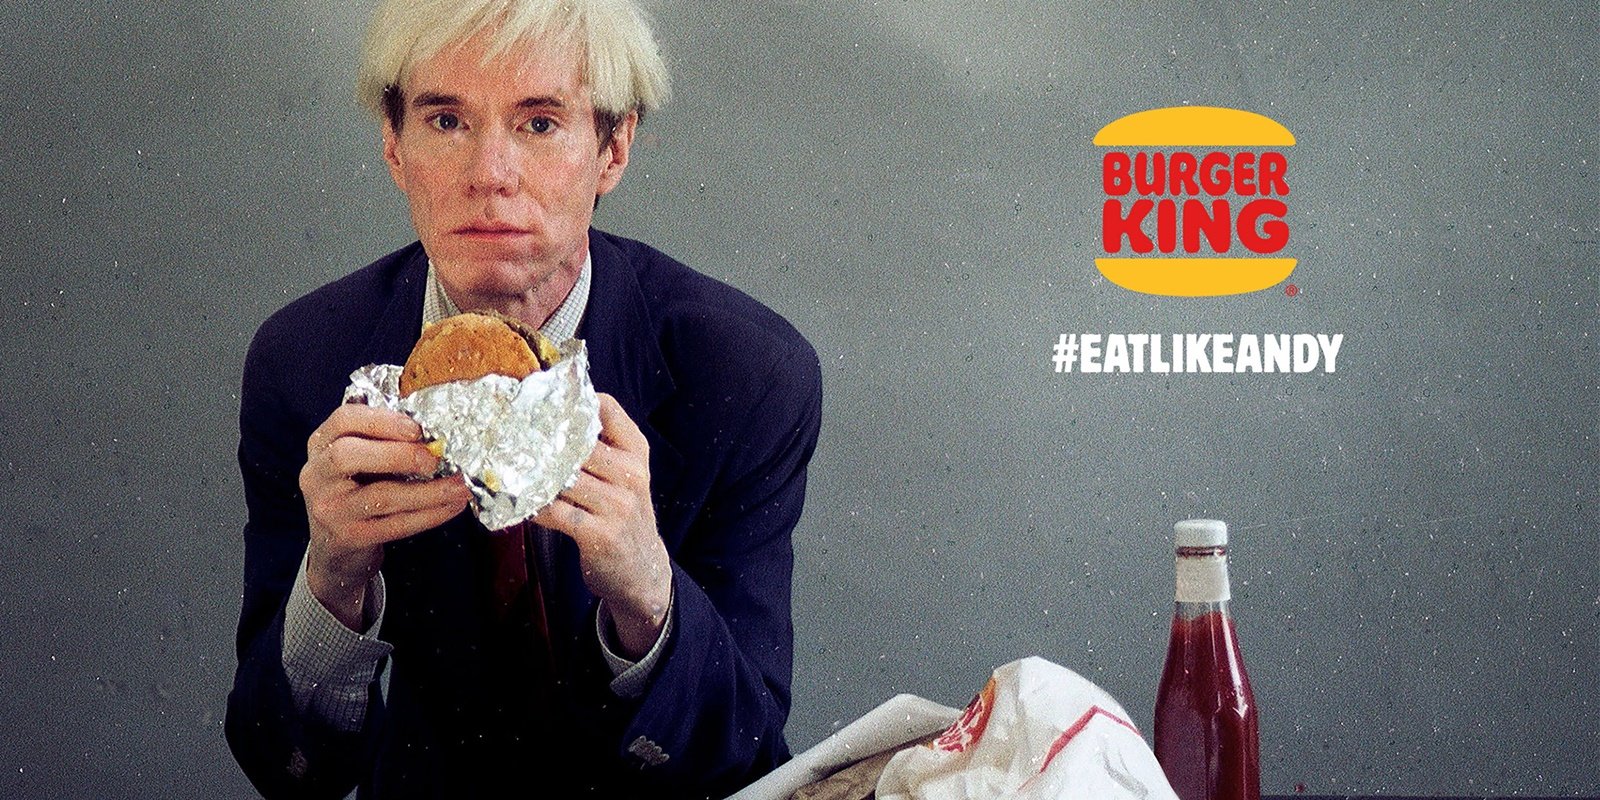 Pop or Flop? Burger King's Andy Warhol Super Bowl Ad Succeeded in ...